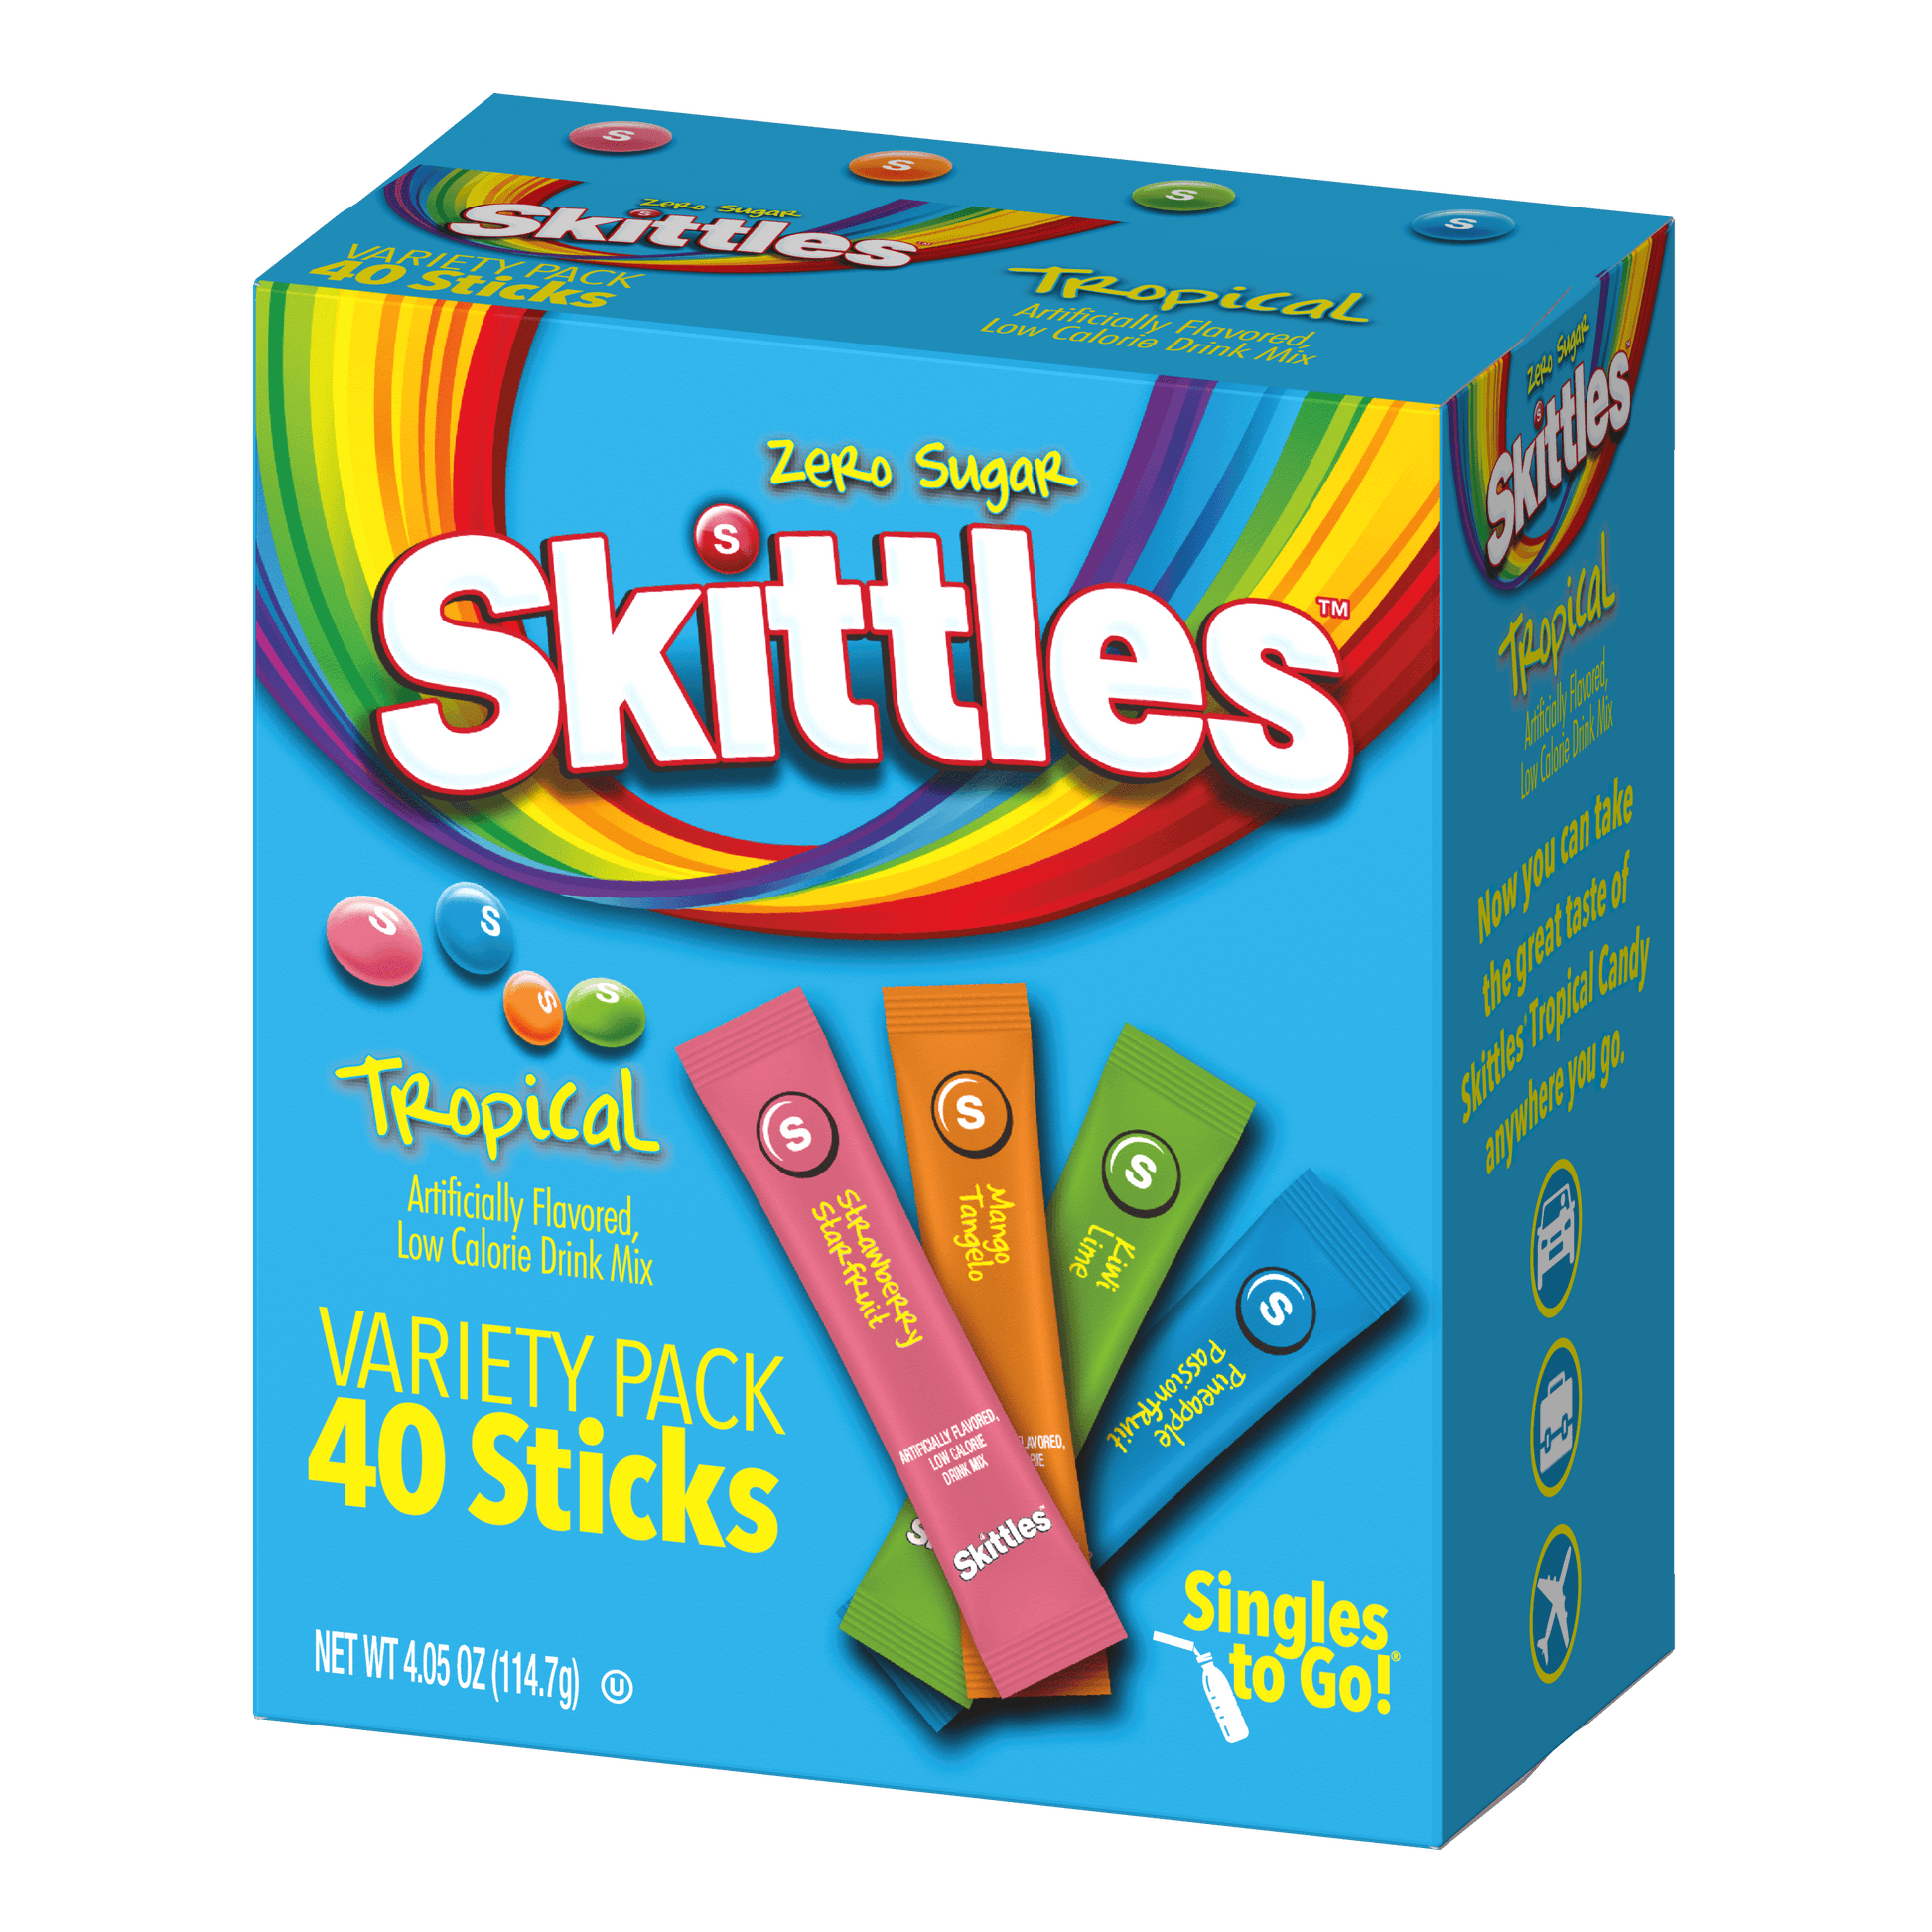 Skittles tropical flavor 40 count singles to go packaging